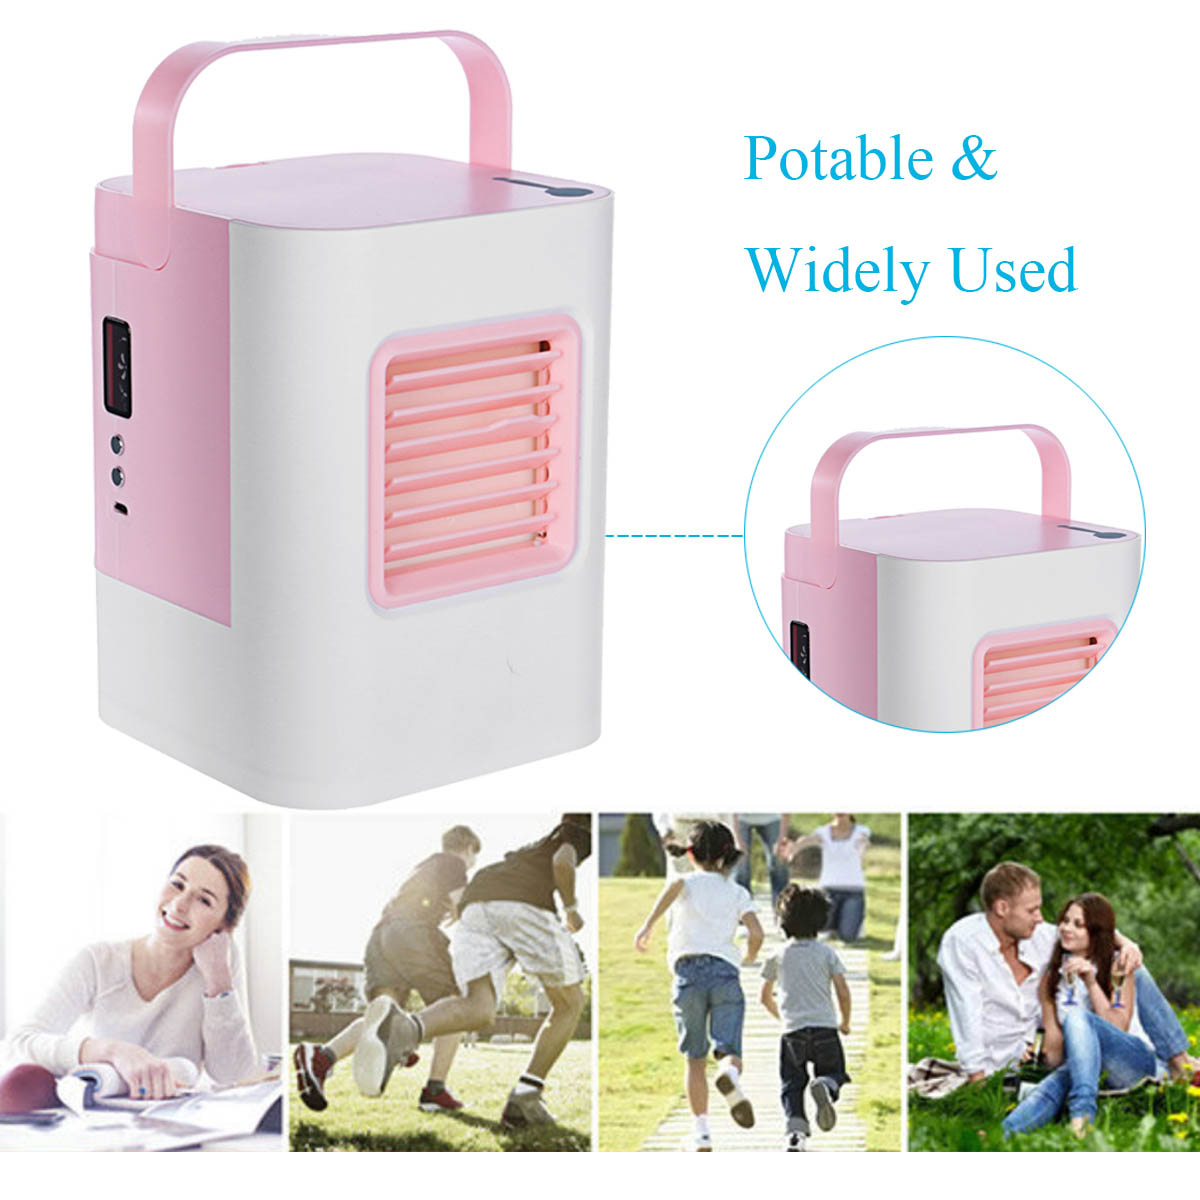 USB-Conditioner-Fan-Refrigeration-Air-Personal-Space-Cooler-Portable-Air-Conditioner-Cooling-Fan-1311326-2